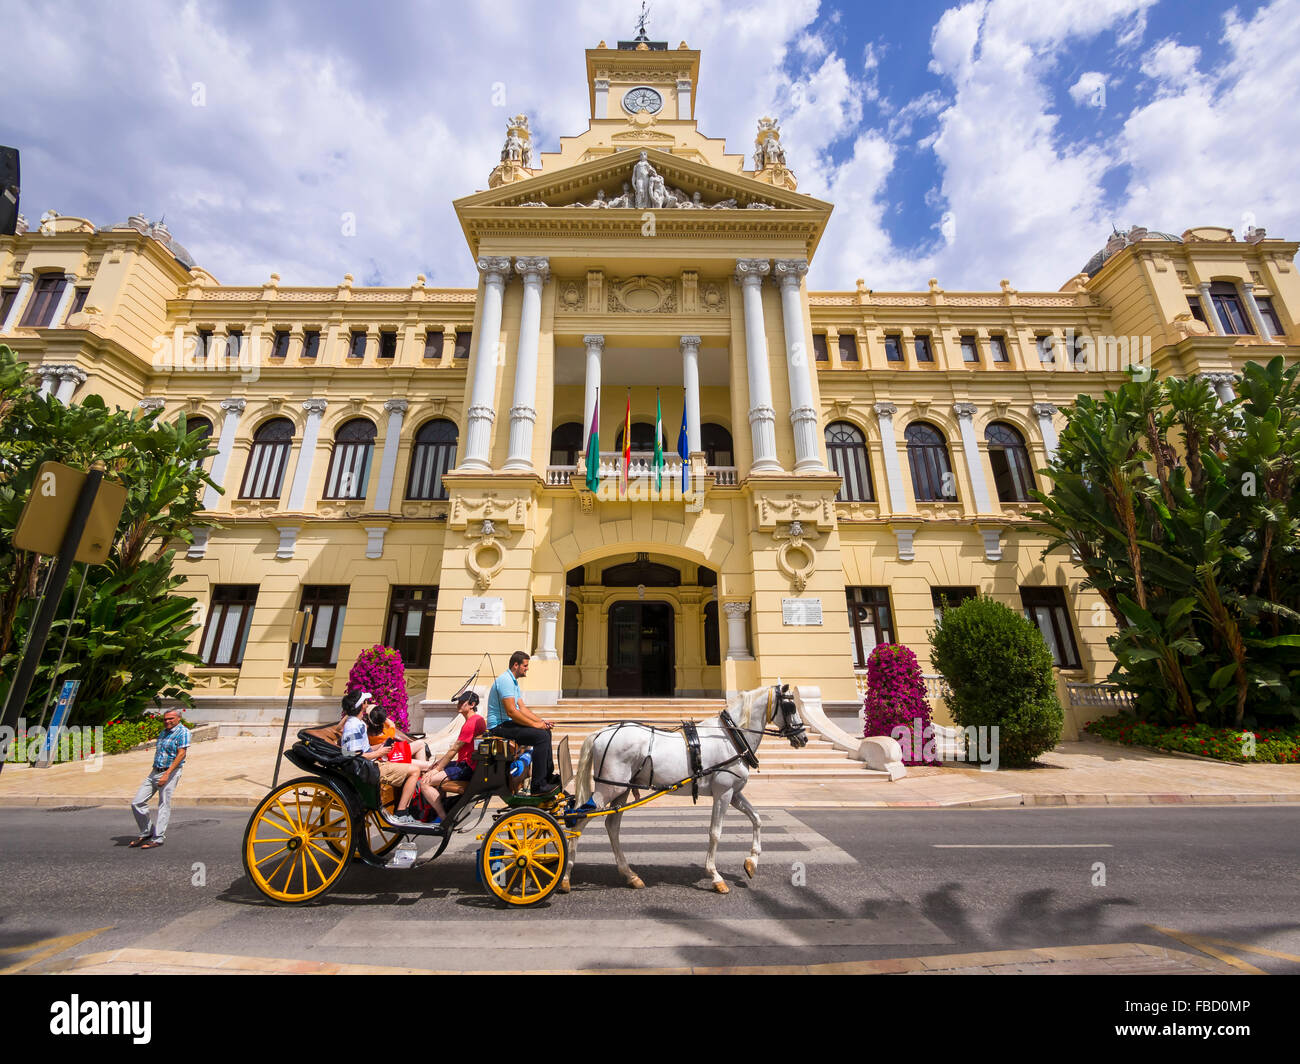 Carriage in front of the City Hall, Malaga, Malaga province, Andalucía, Spain Stock Photo